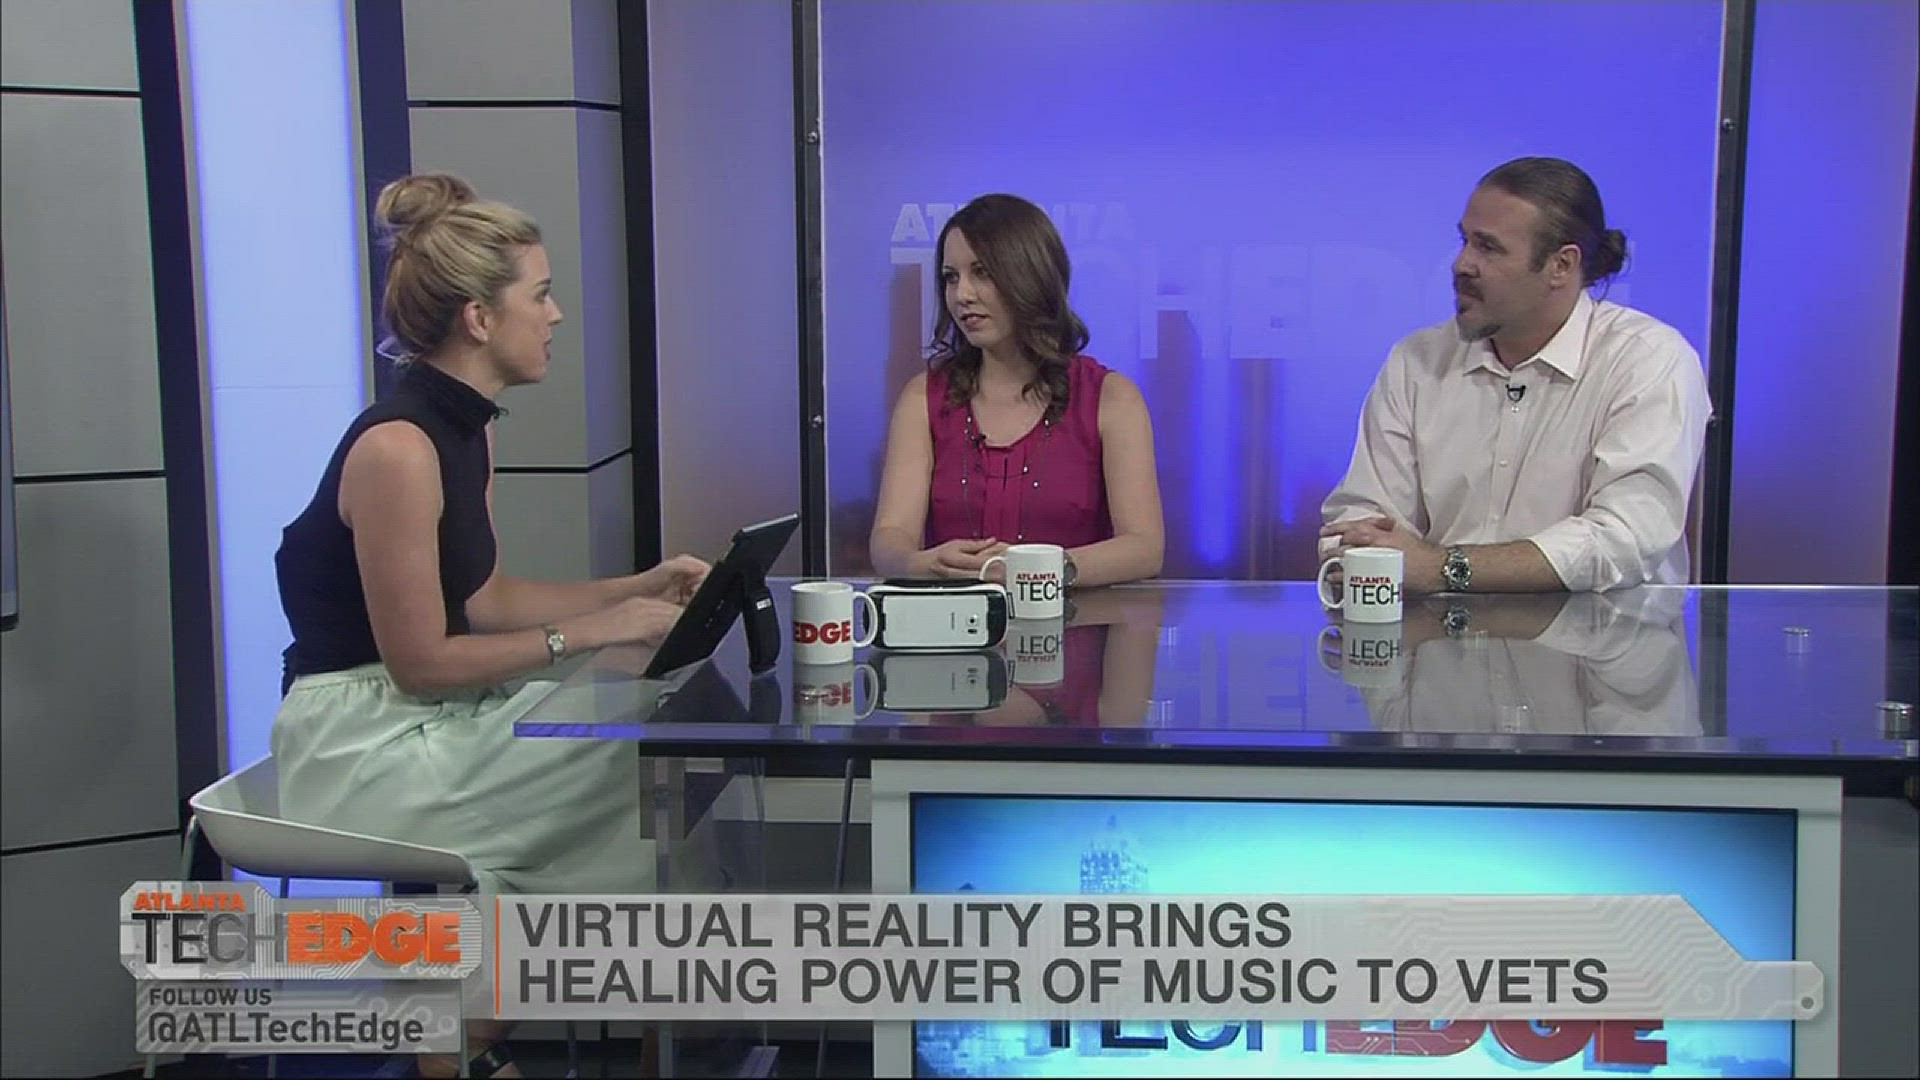 www.11alive.comHost Cara Kneer talks with Jaye Budd of Alchemy Sky Foundation and Annie Eaton of Futurus about using virtual reality to bring the healing power of music to veterans. Then, 'Black-ish' star Alan Maldonado talks about his new app, 'Everybod